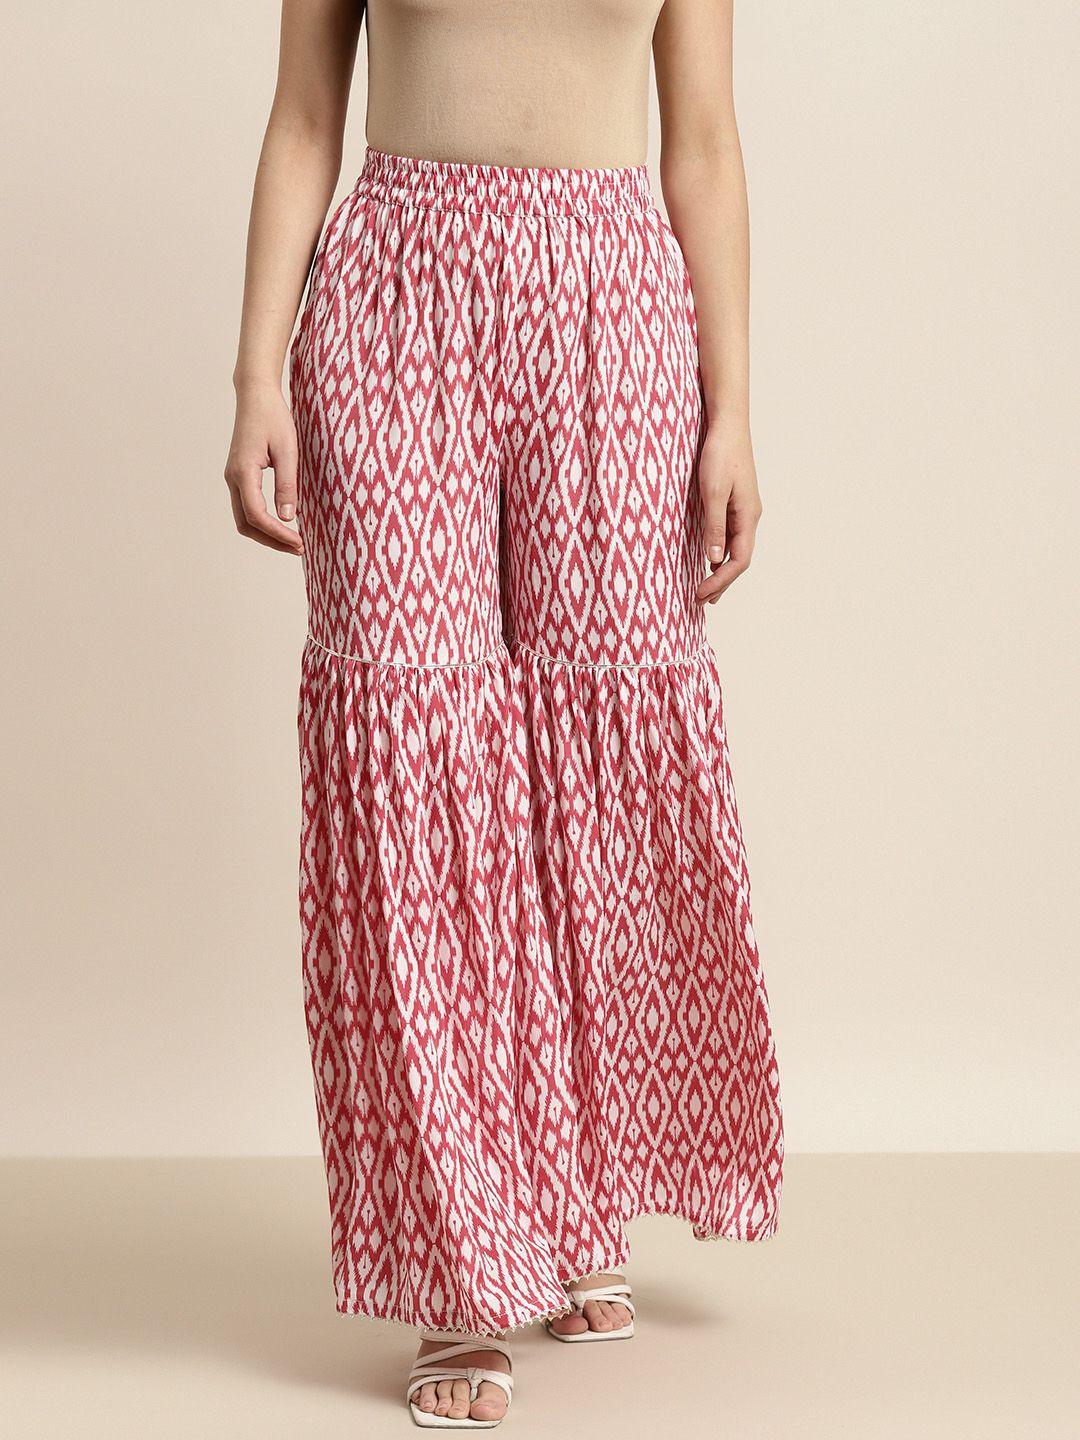 shae-by-sassafras-women-red-&-white-printed-flared-pleated-sharara-pants